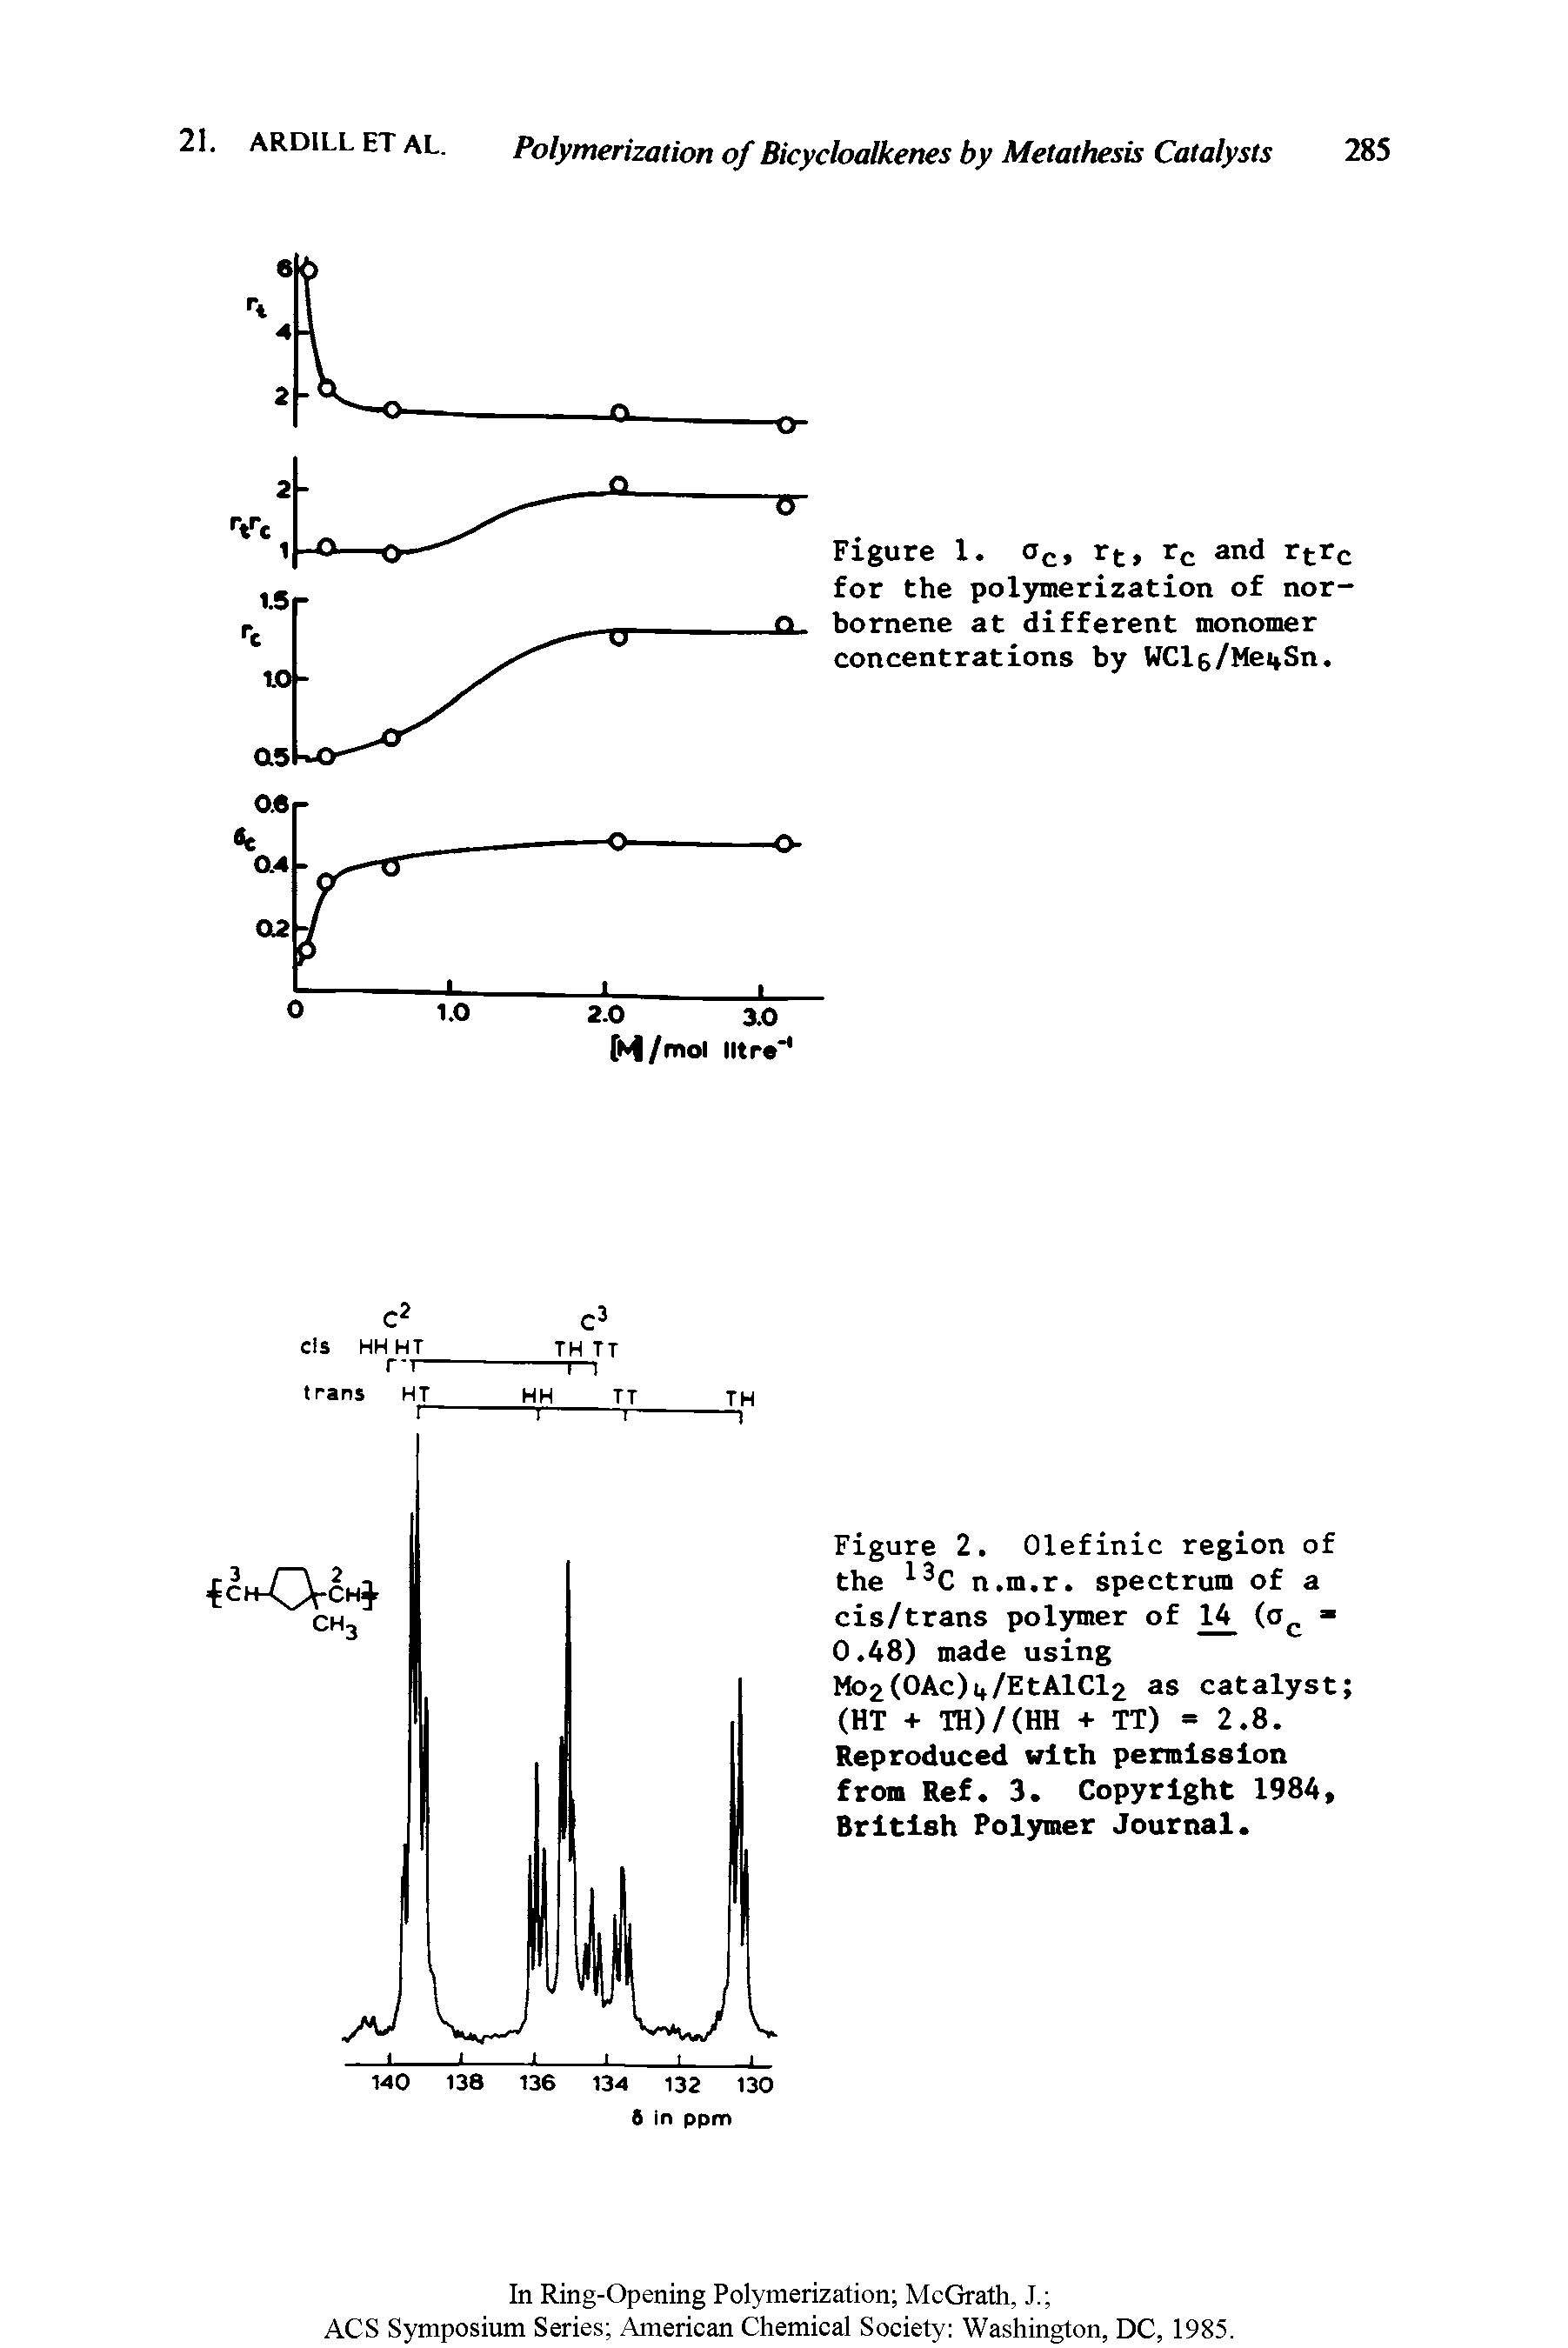 Figure 2. Olefinic region of the n.m.r. spectrum of a cis/trans polymer of (a. -0.48) made using Mo2(OAc)i,/EtAlCl2 as catalyst (HT + TH)/(HH + TT) - 2.8. Reproduced with permission from Ref. 3. Copyright 1984 British Polymer Journal.